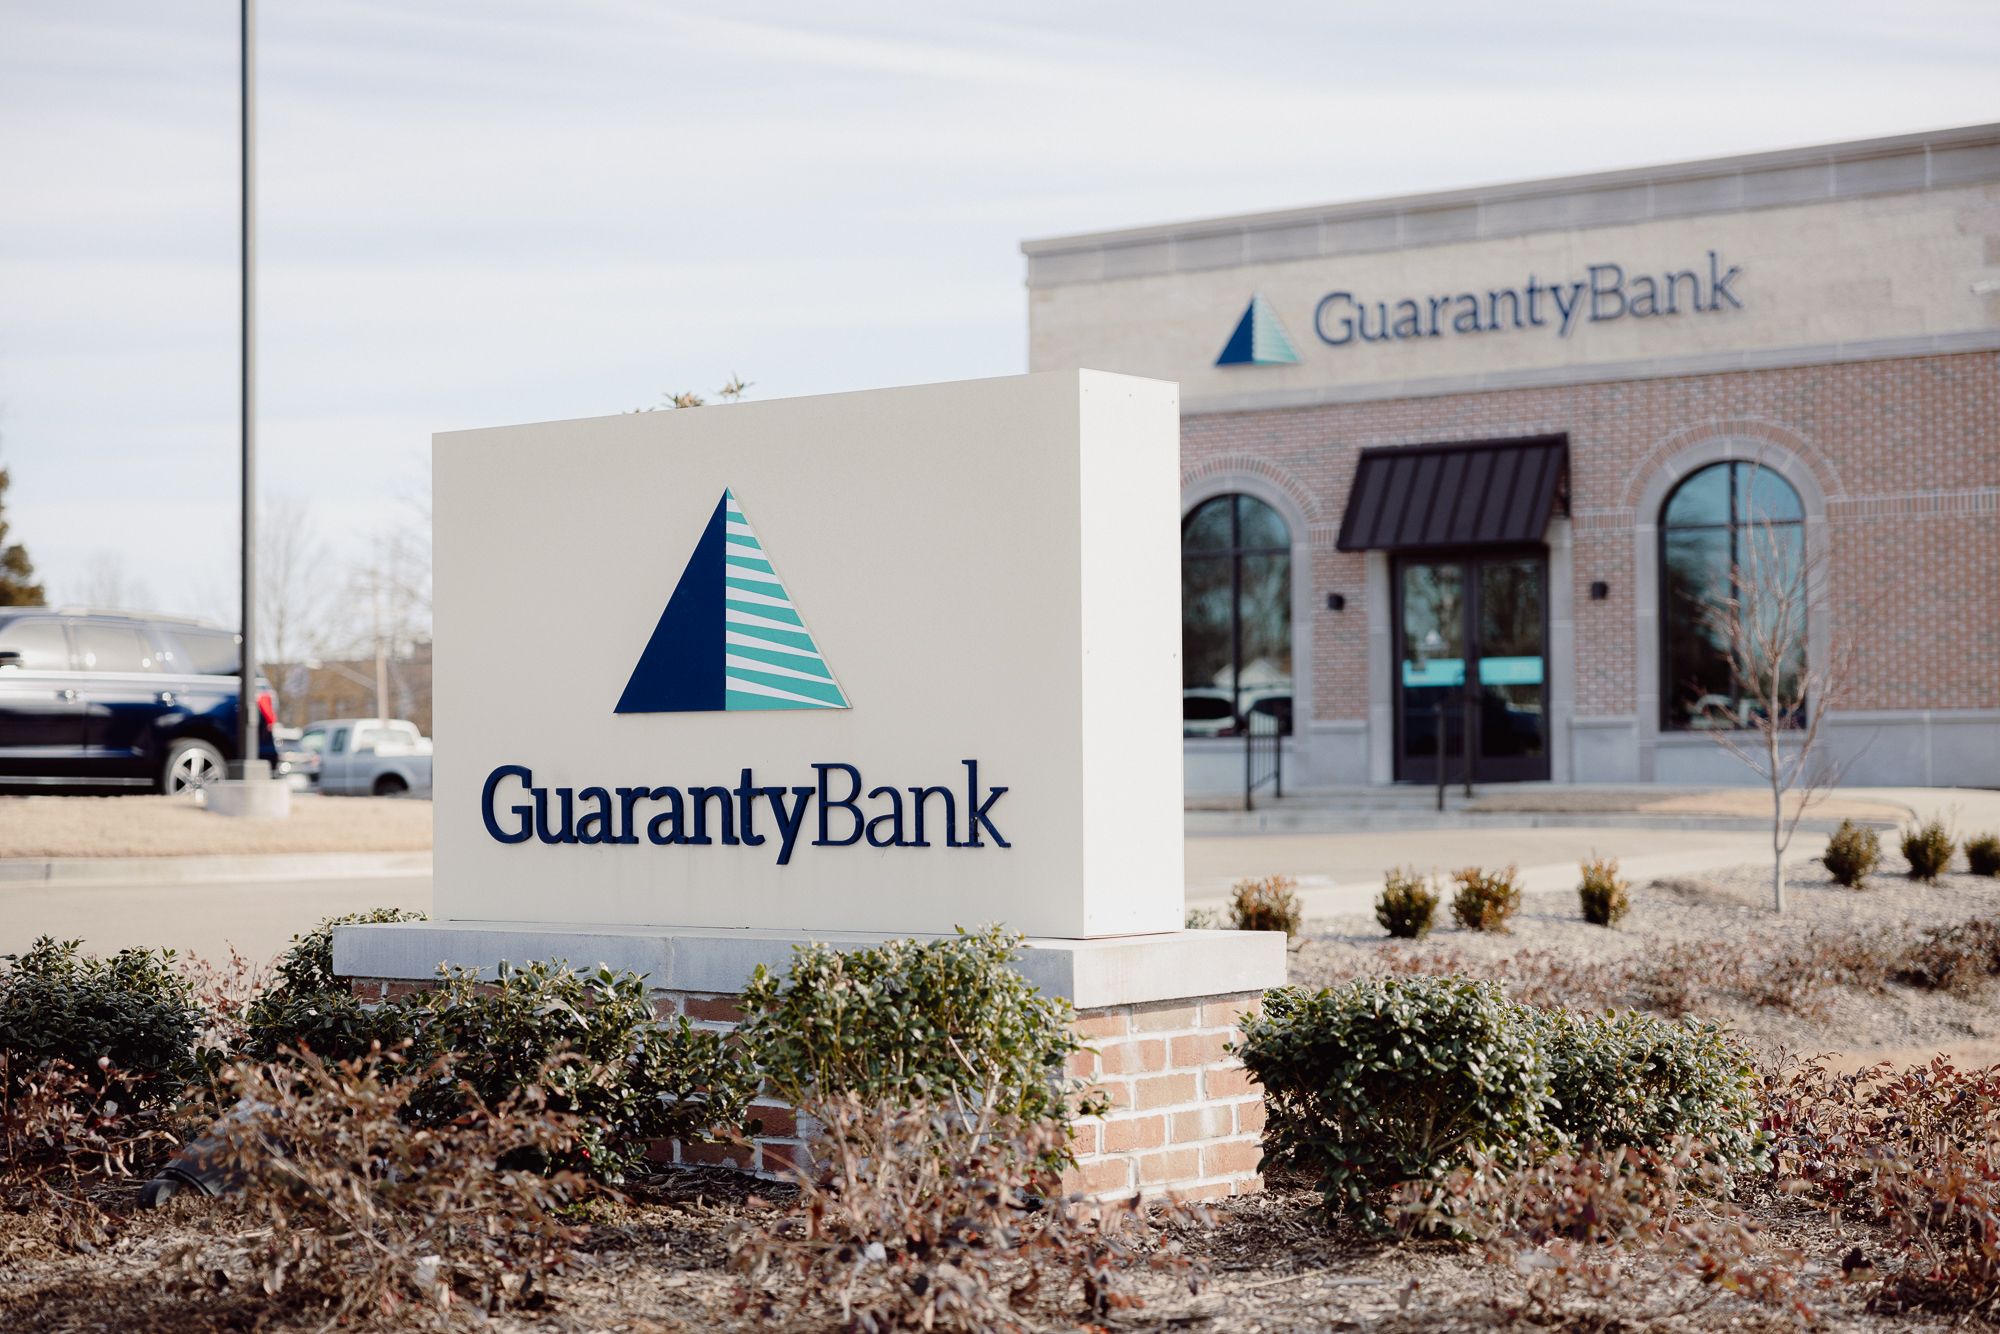 http://Guaranty%20Bank%20outdoor%20signage%20in%20front%20of%20the%20bank%20building.